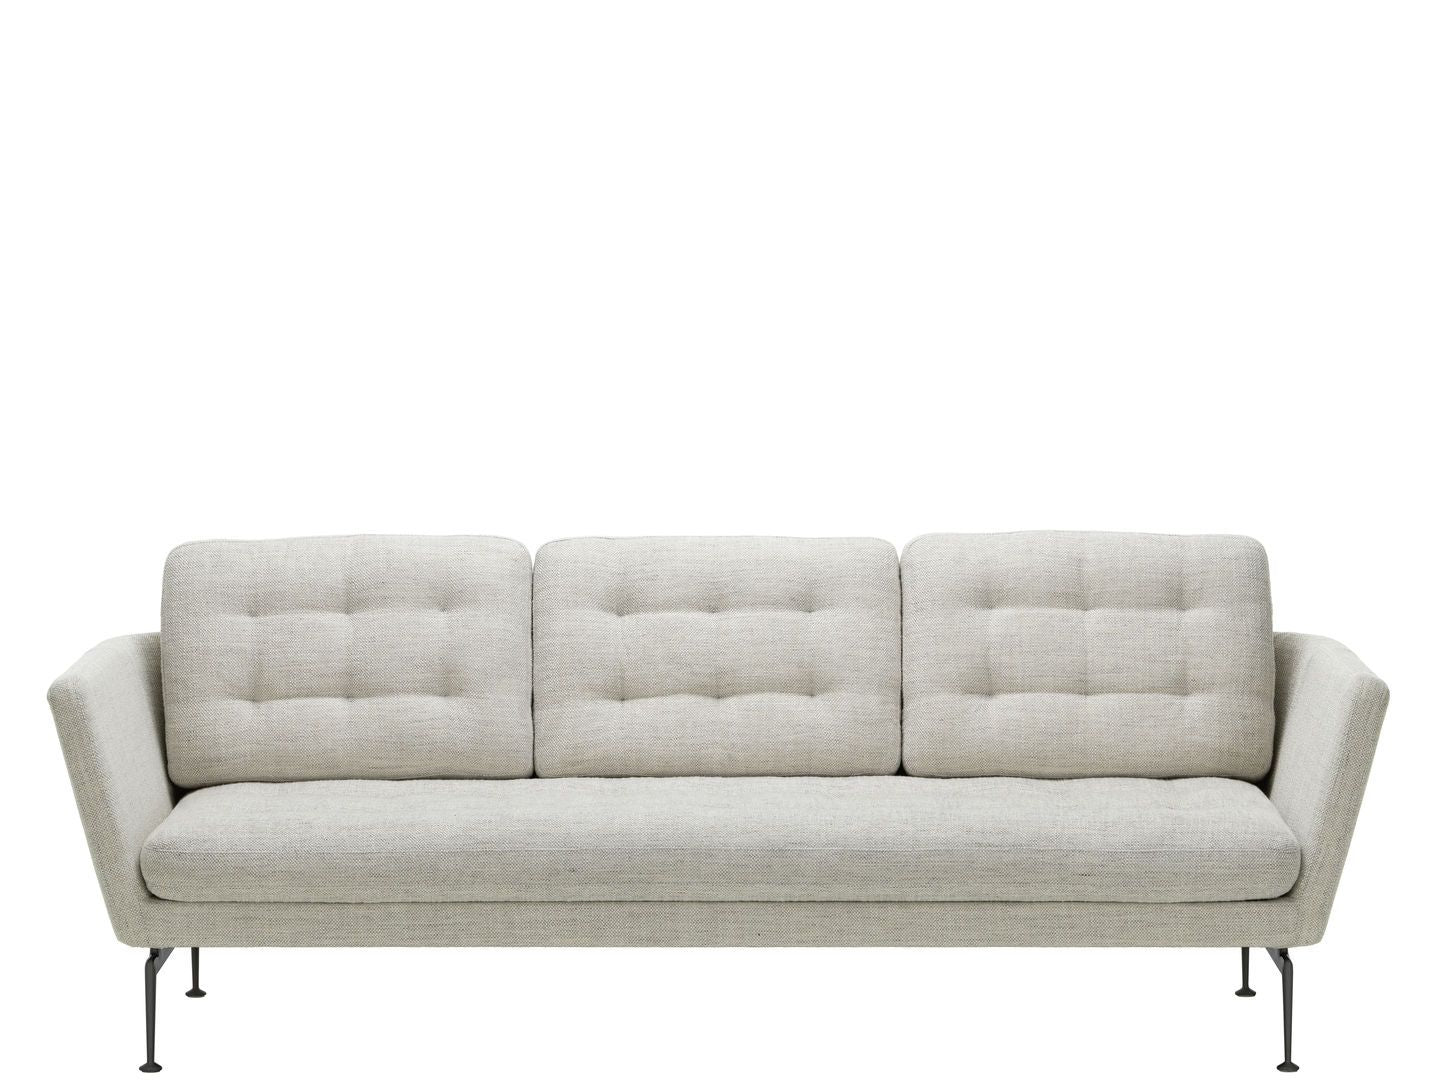 Vitra Suita 3-Seater Tufted Sofa from One52 Furniture